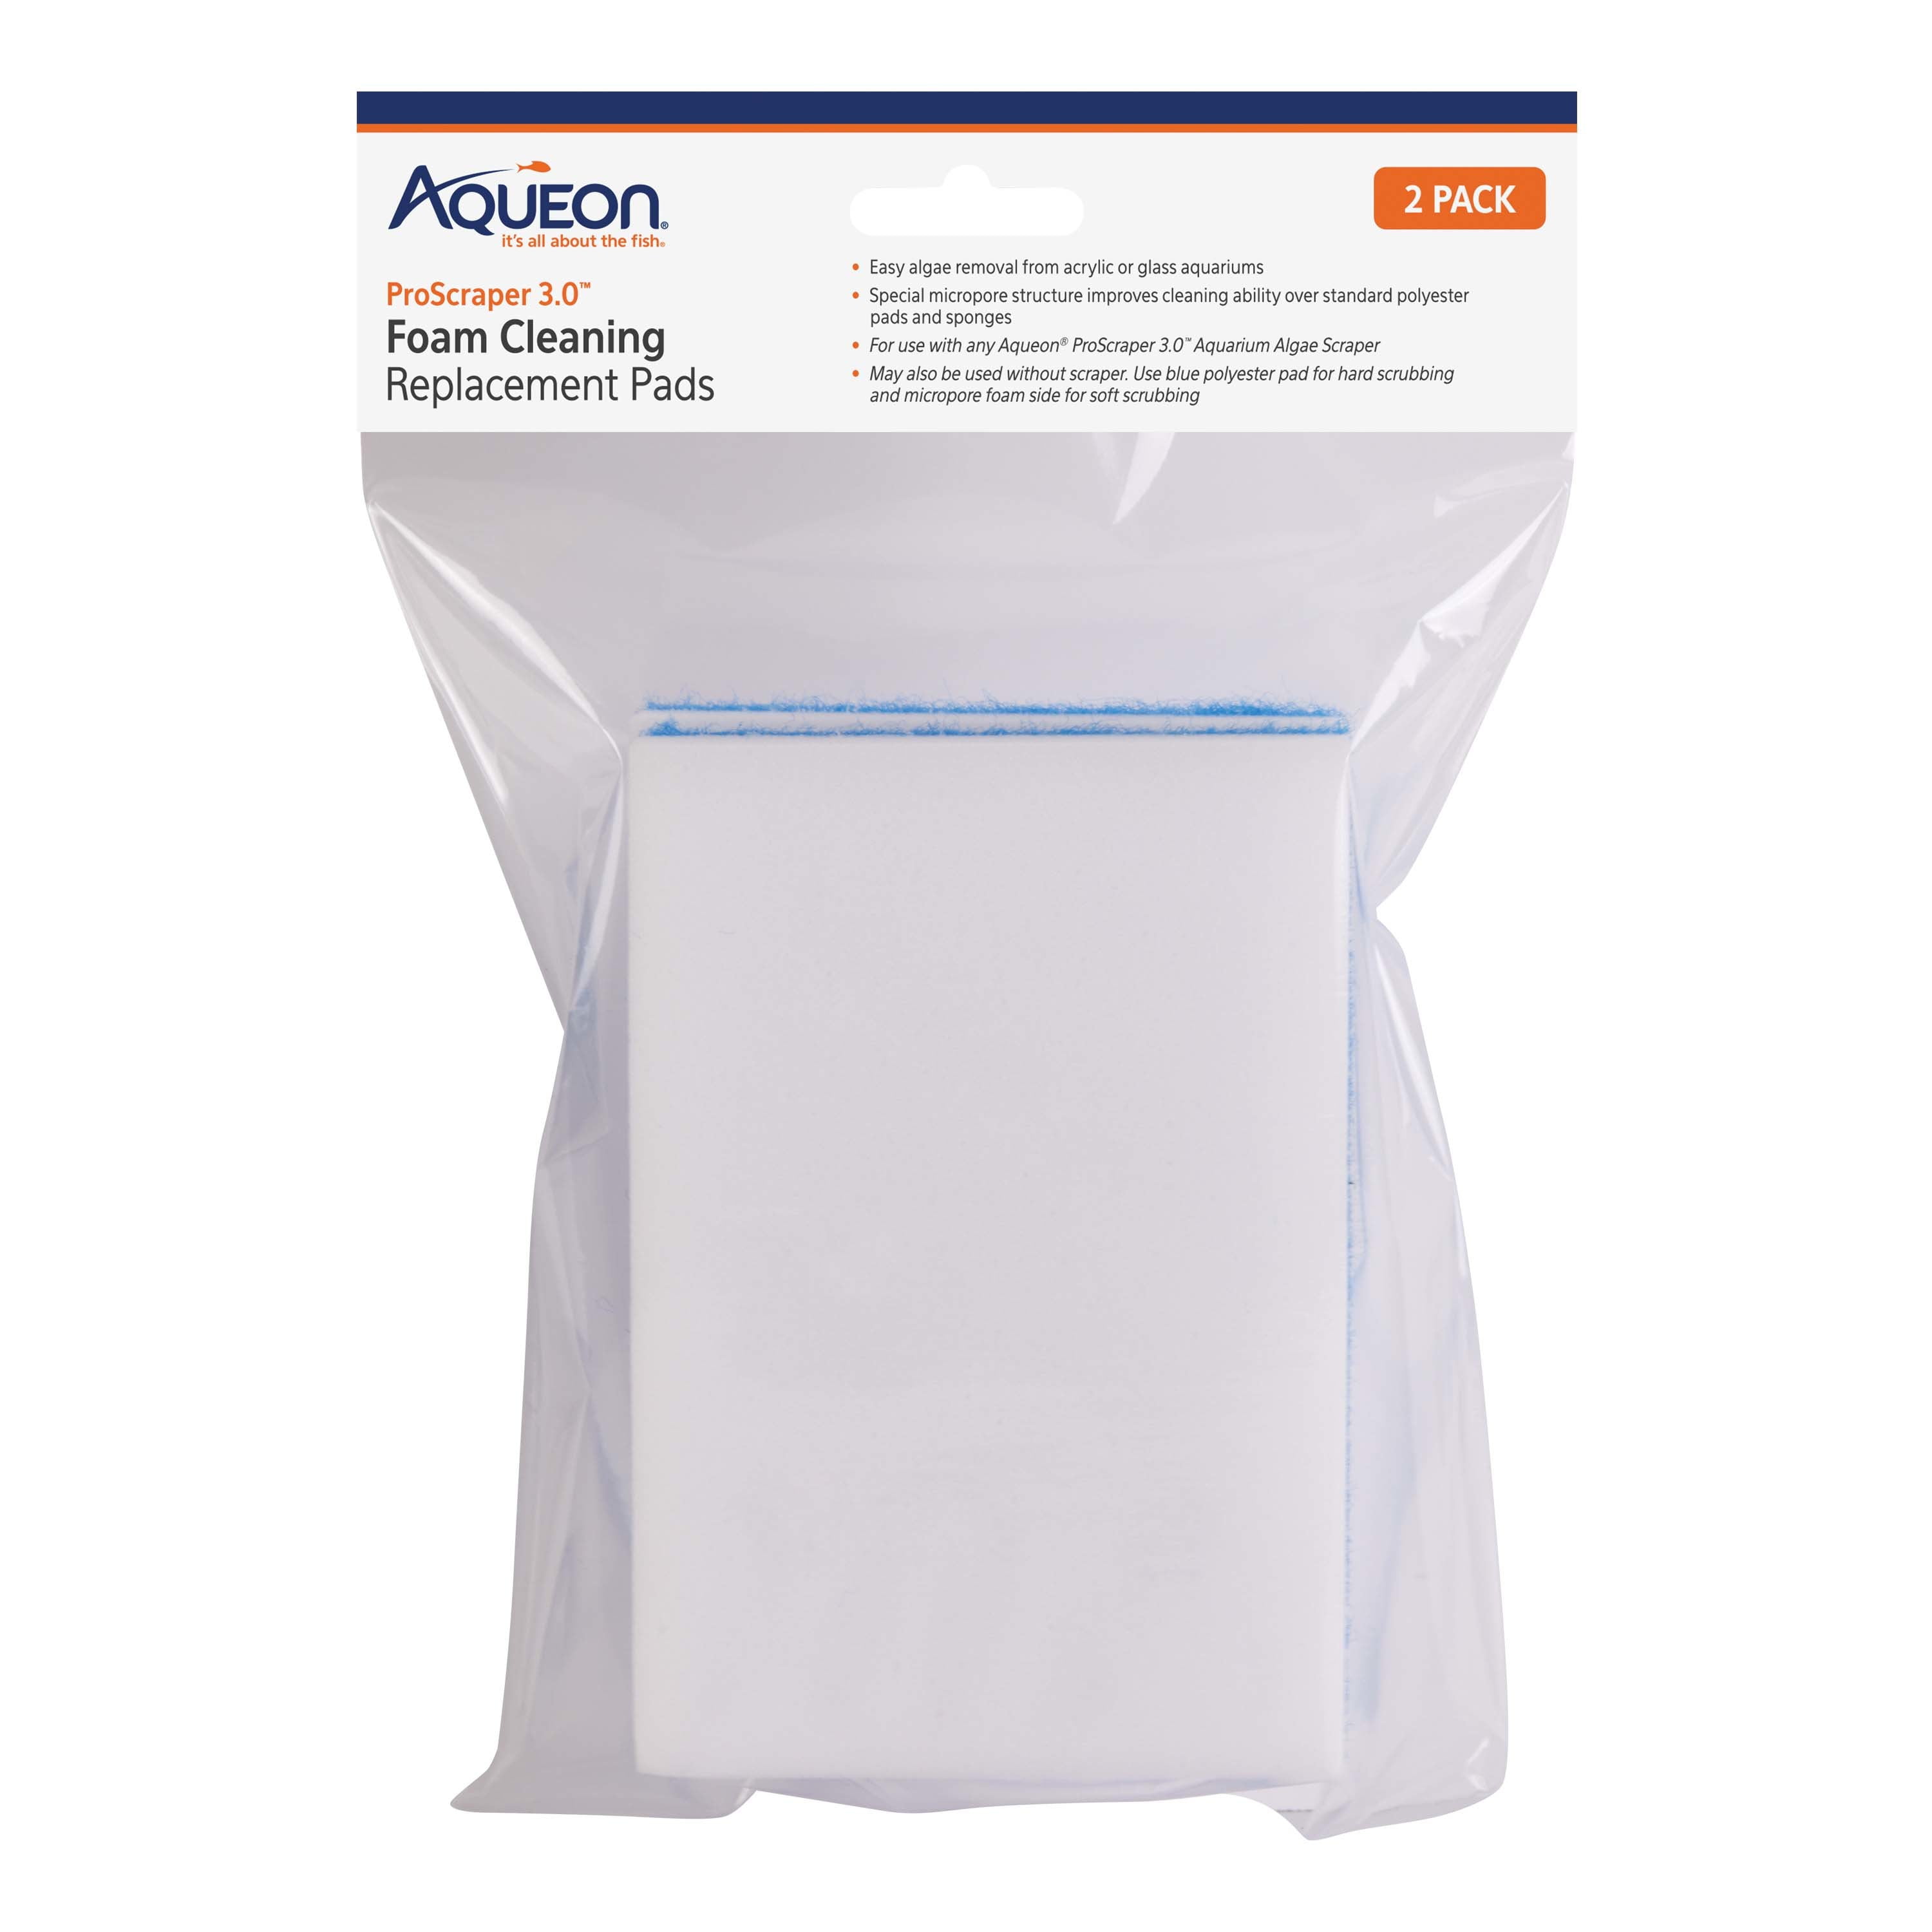 Picture of Aqueon Products 100545942 Proscraper 3.0 Foam Cleaning Pads - Pack of 2